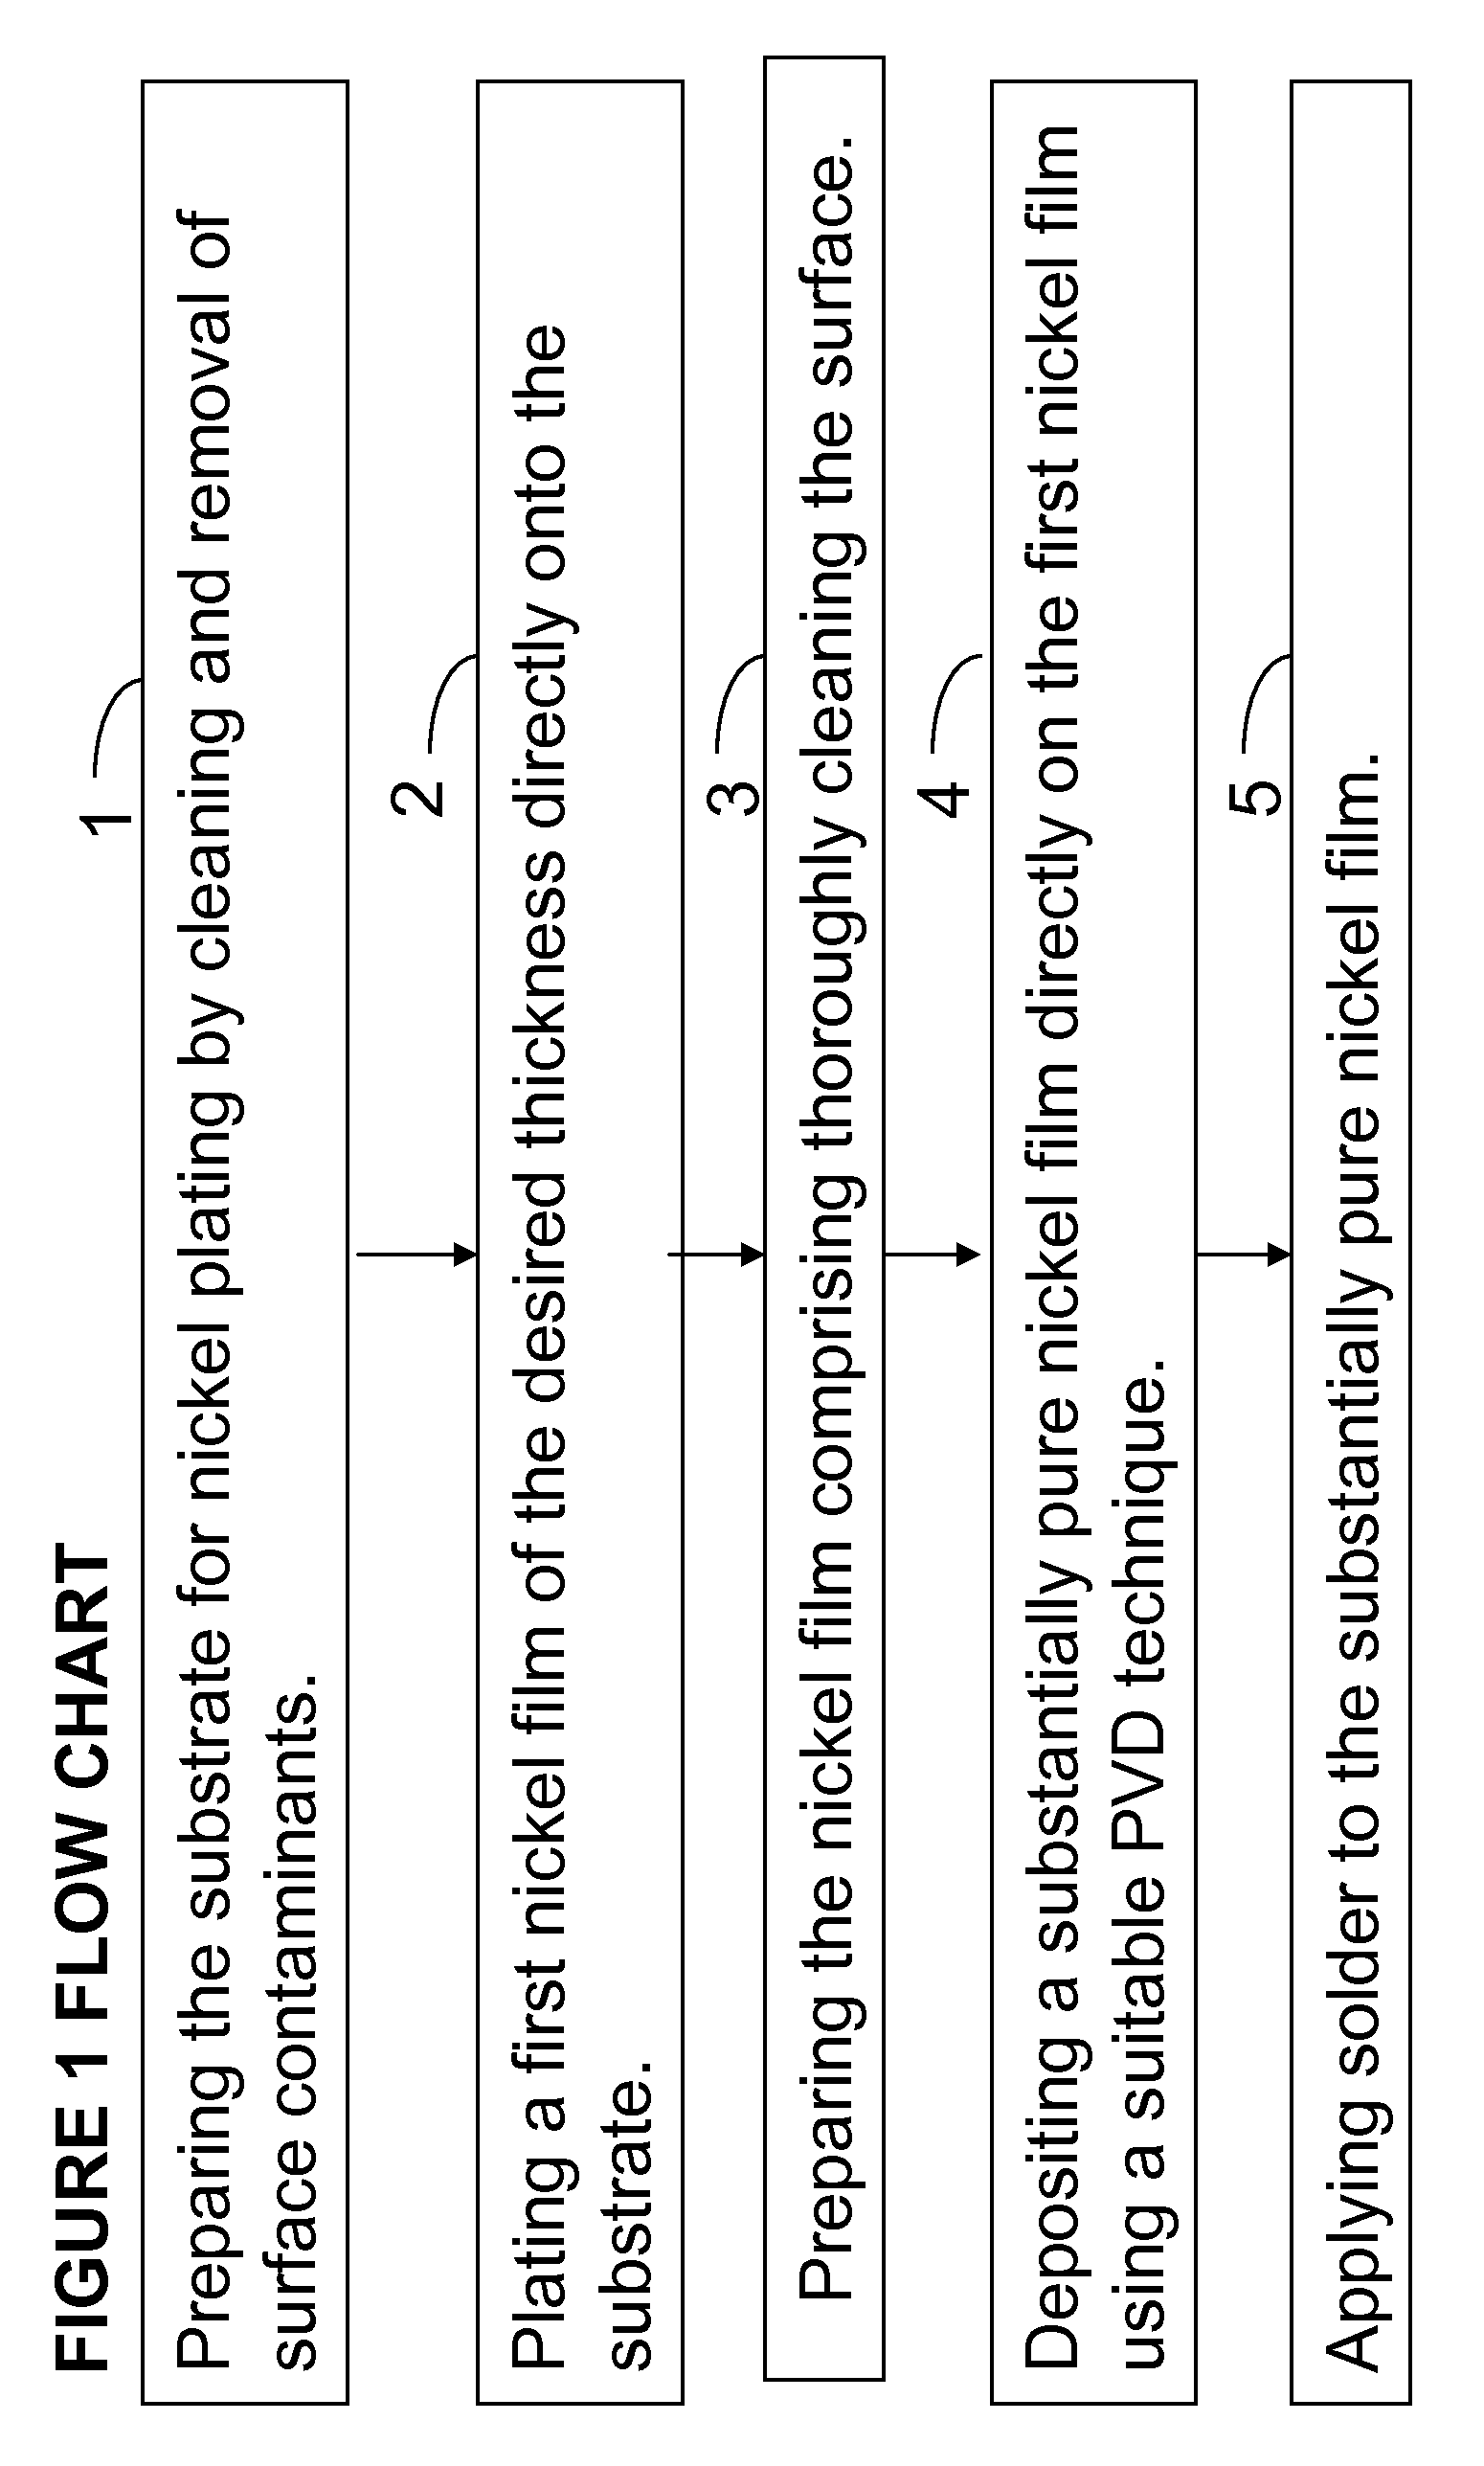 Enhanced solderability using a substantially pure nickel layer deposited by physical vapor deposition